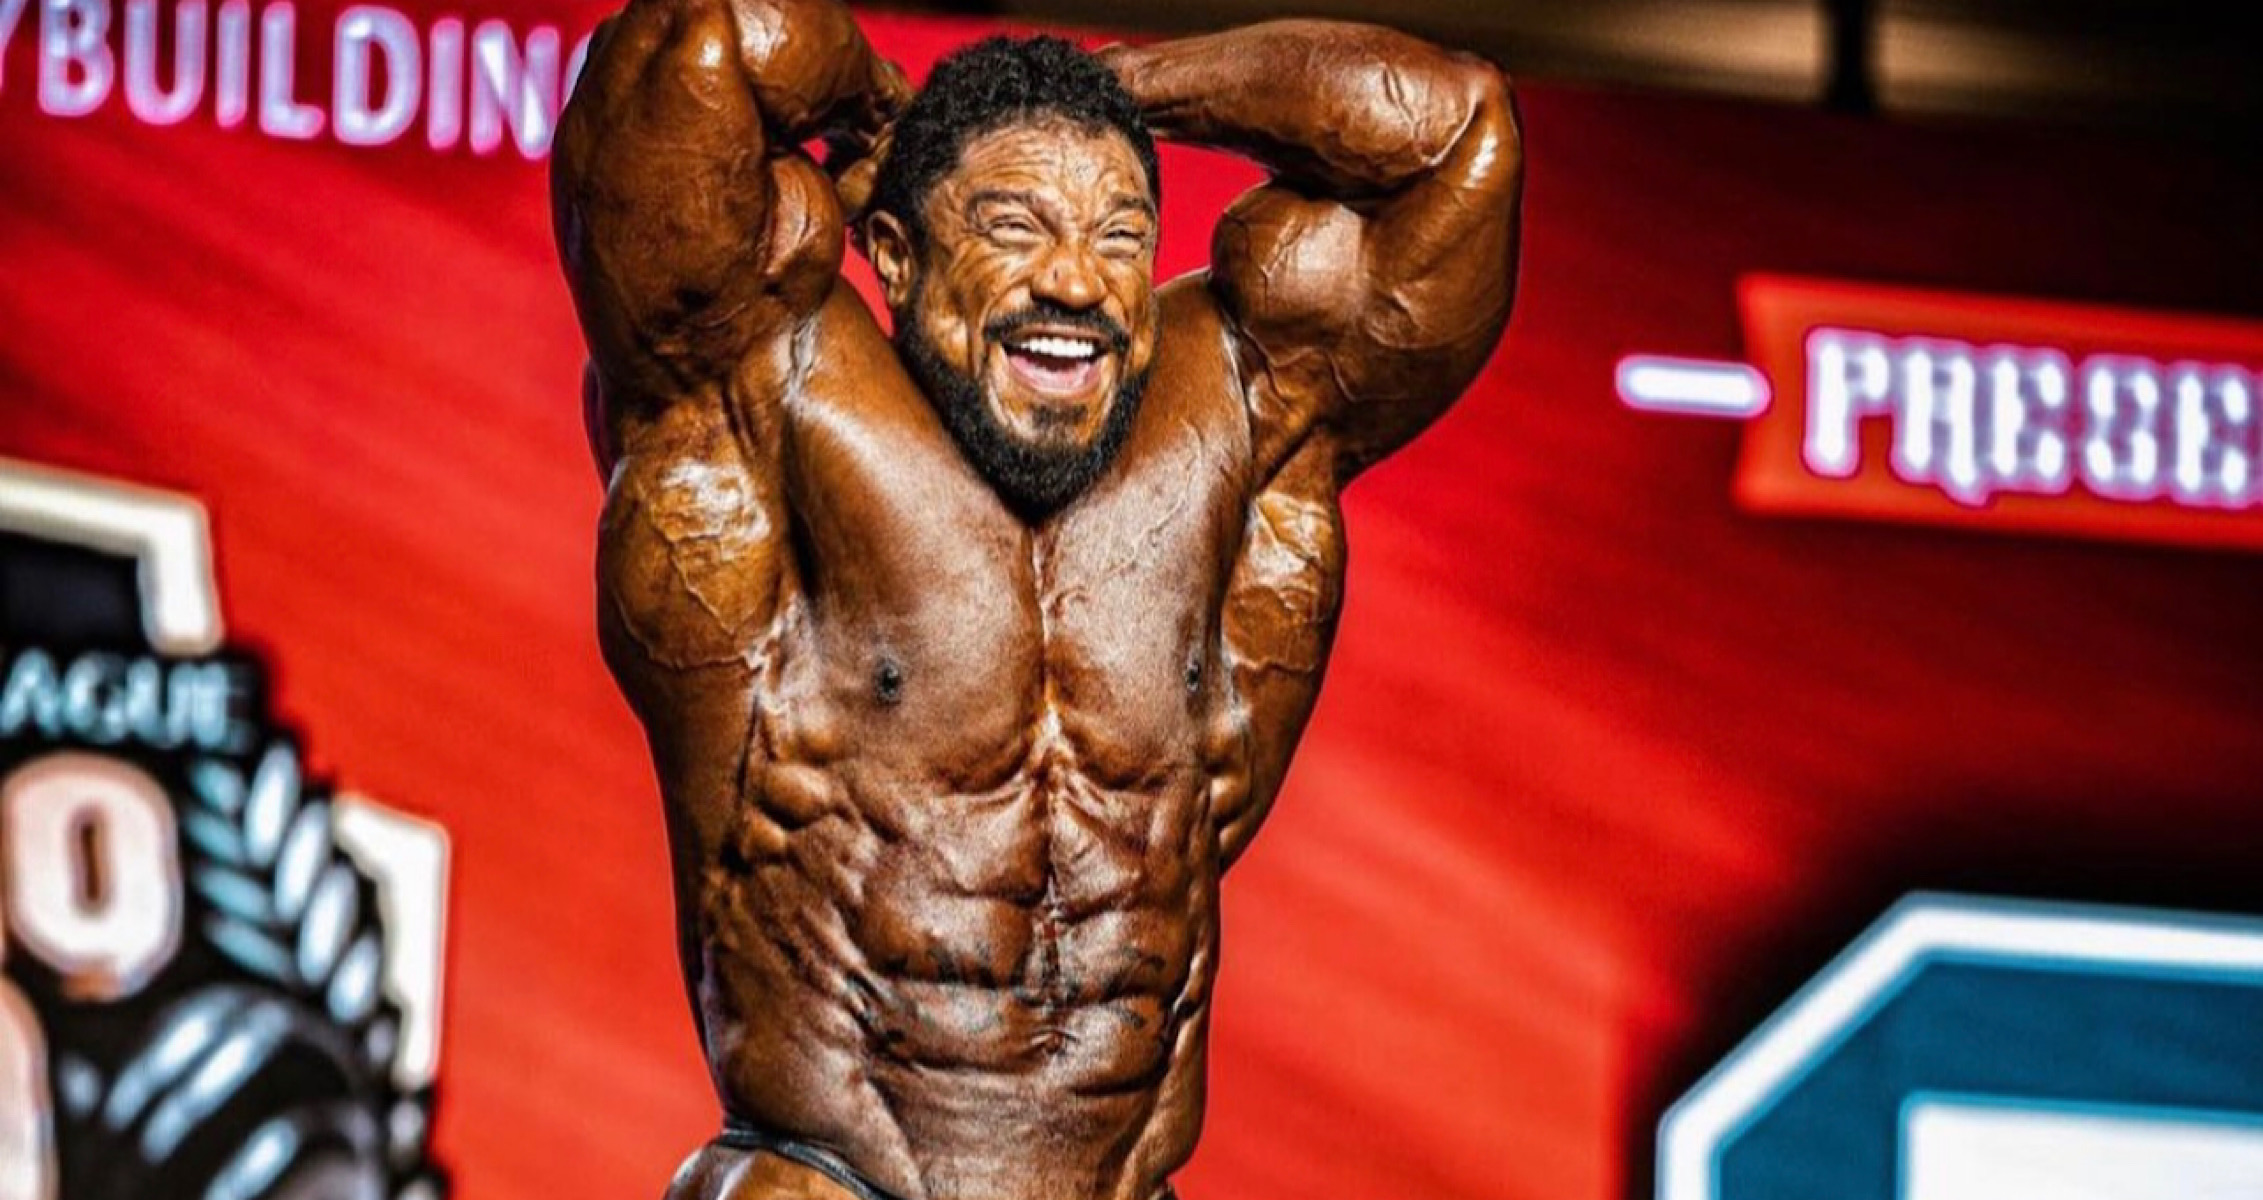 After Taking Fifth at the Chicago Pro, Roelly Winklaar Vows to Compete at Tampa Pro